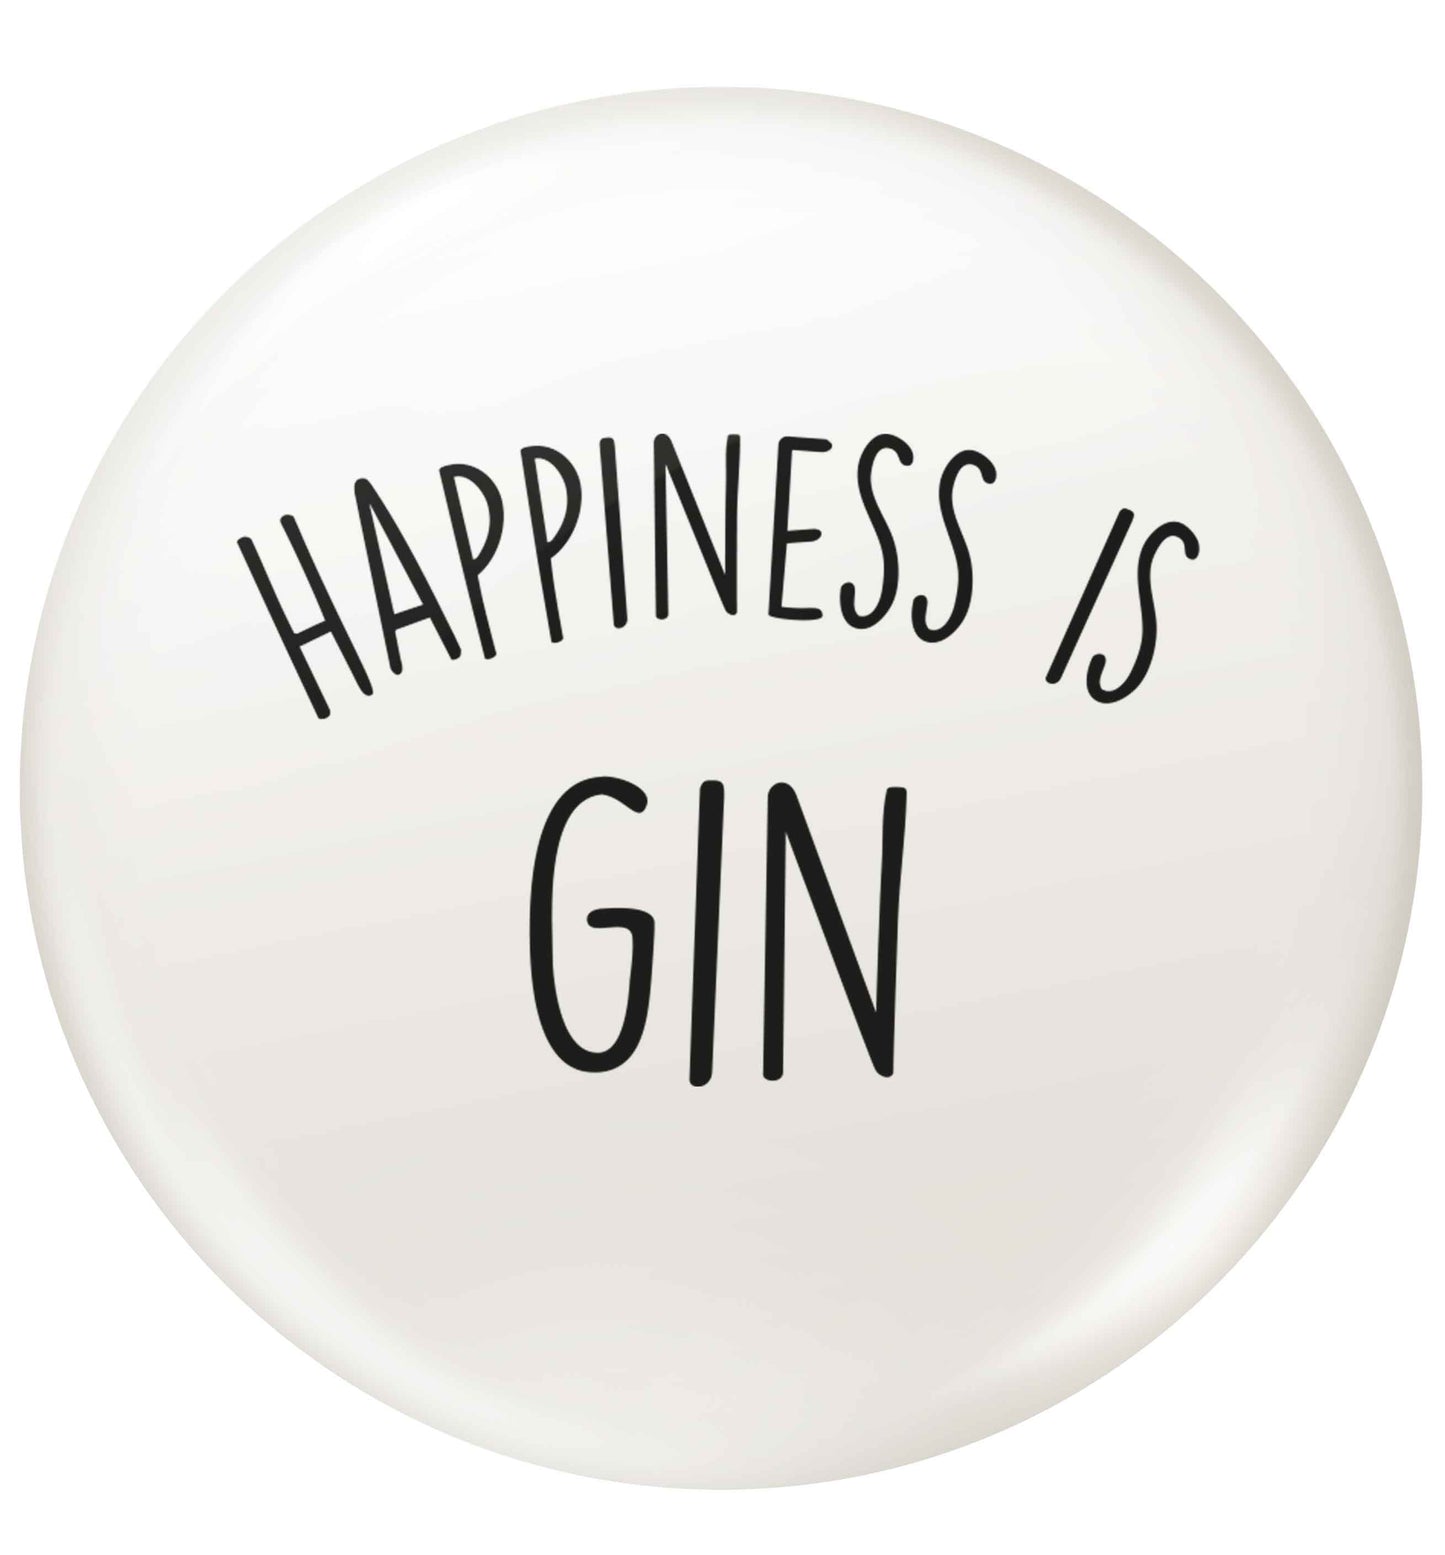 Happiness is gin small 25mm Pin badge